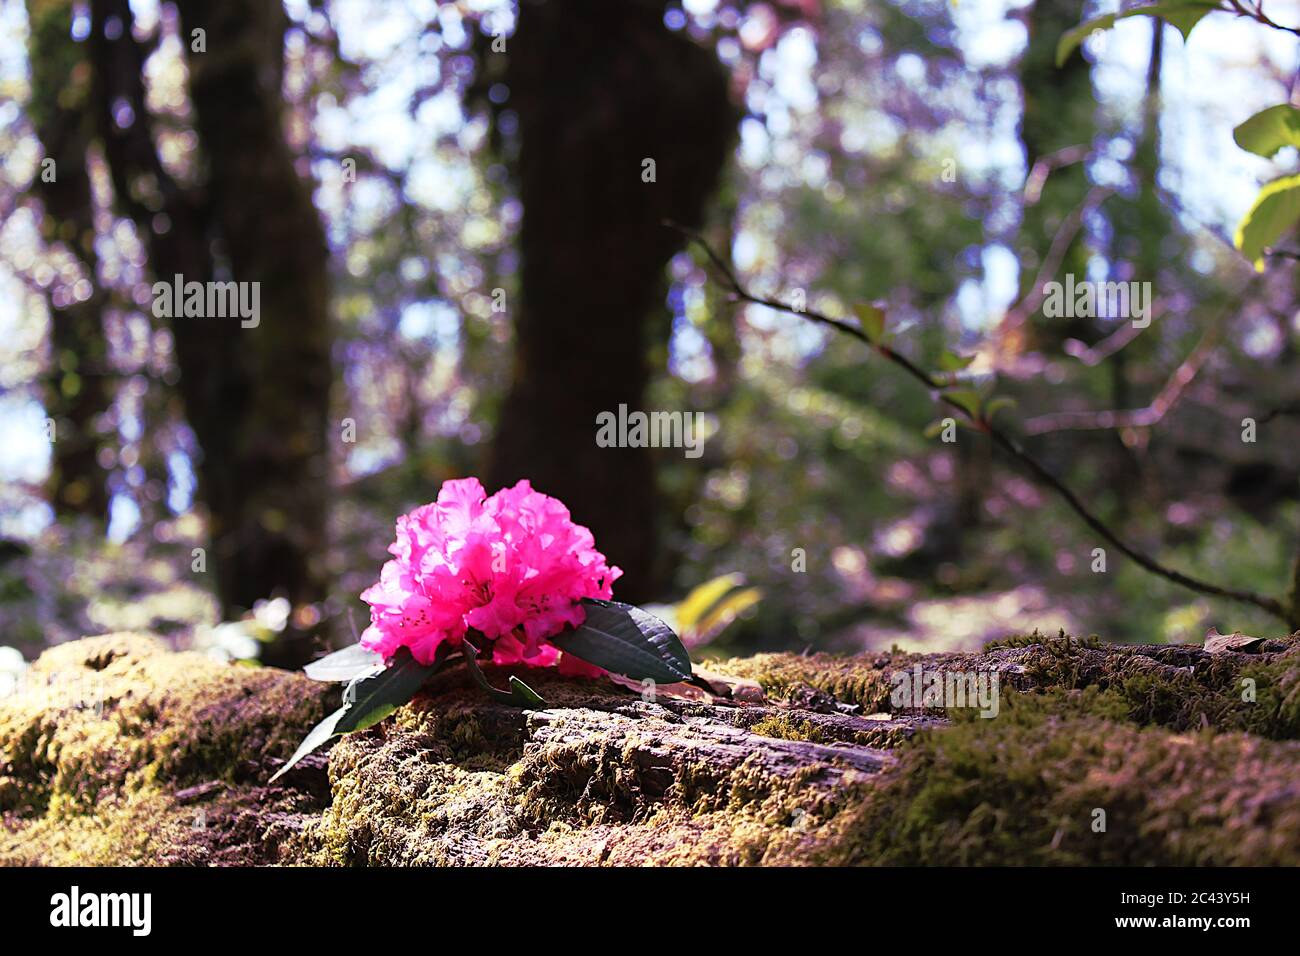 a close up view of burans flower( rhododendron arboreum) in woods. Stock Photo